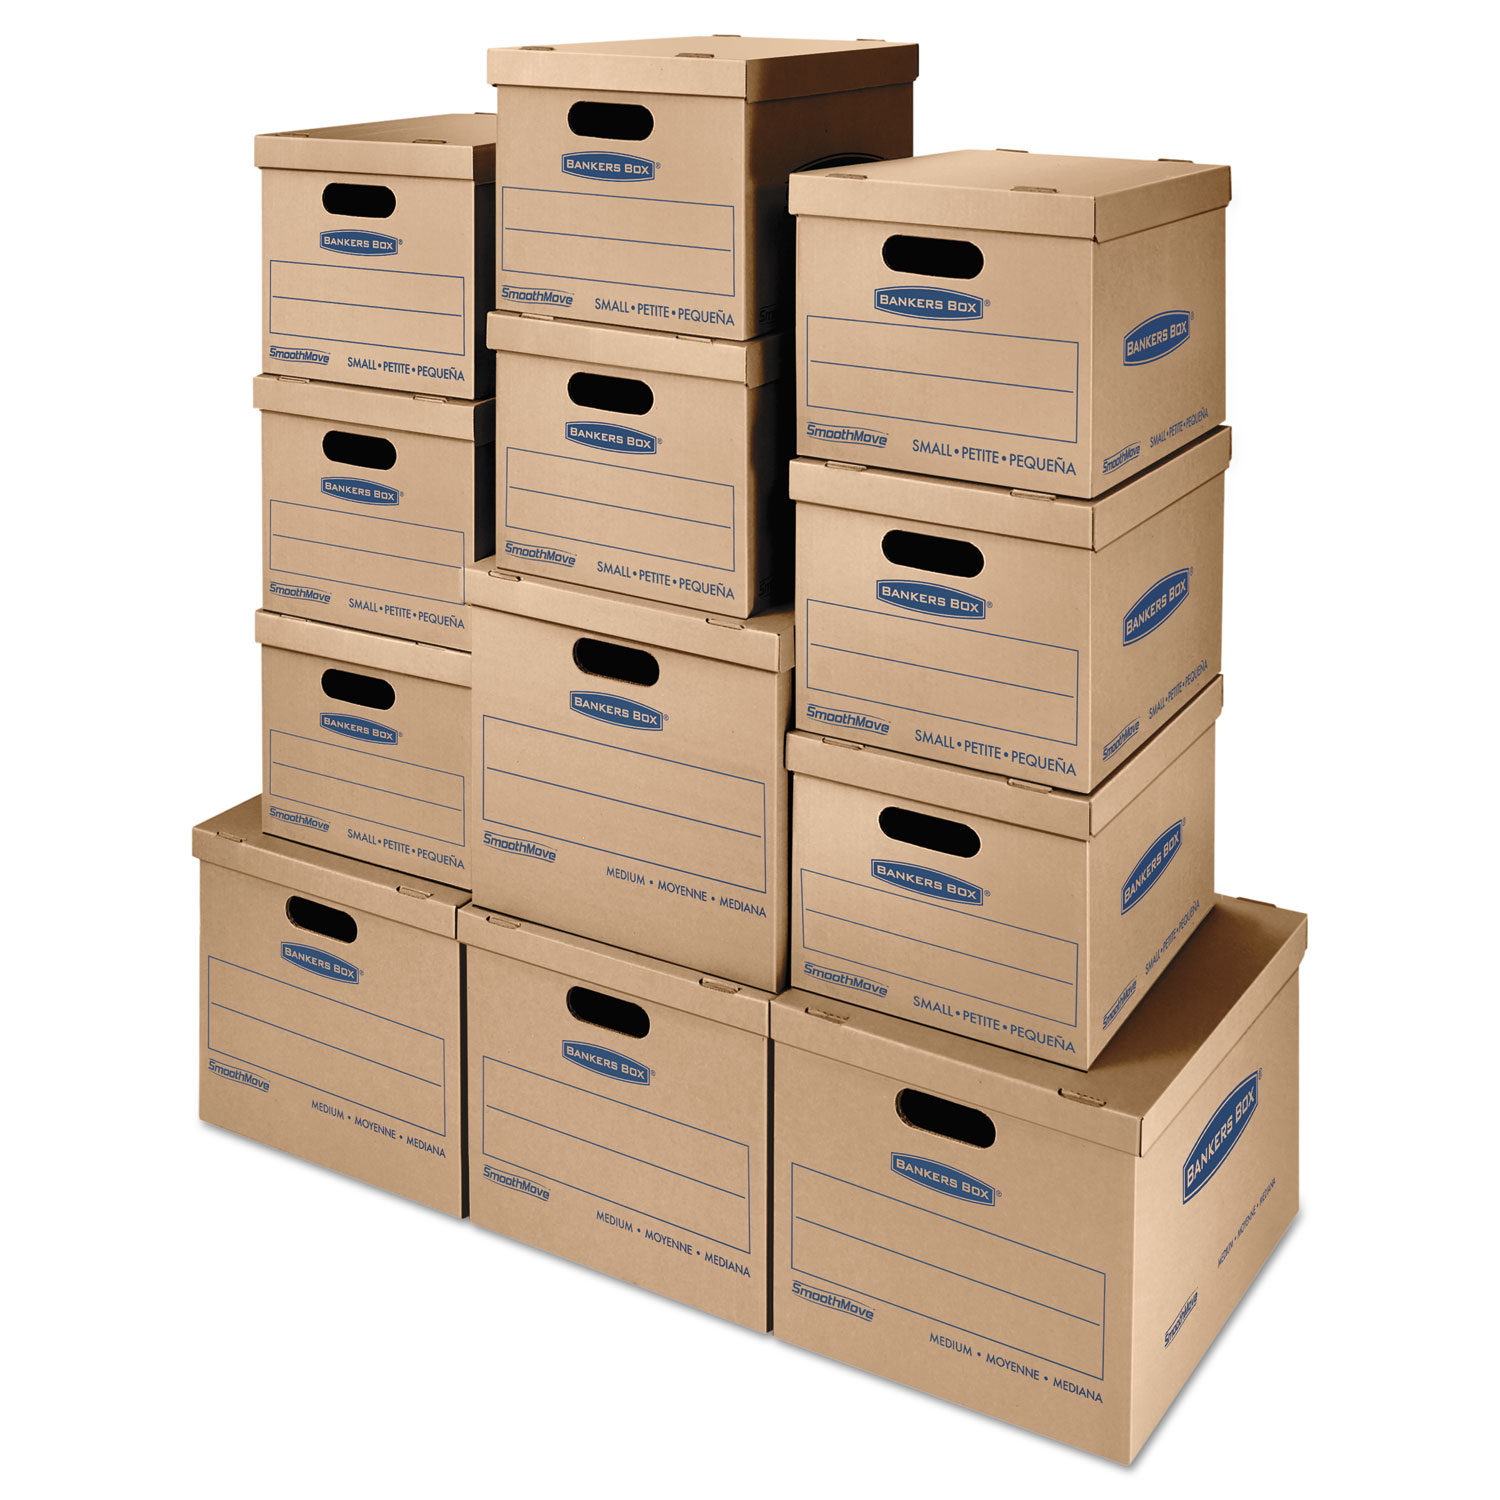 SmoothMove Classic Moving & Storage Boxes, Assorted Sizes, Half Slotted Container (HSC), Brown Kraft/Blue, 12/Carton